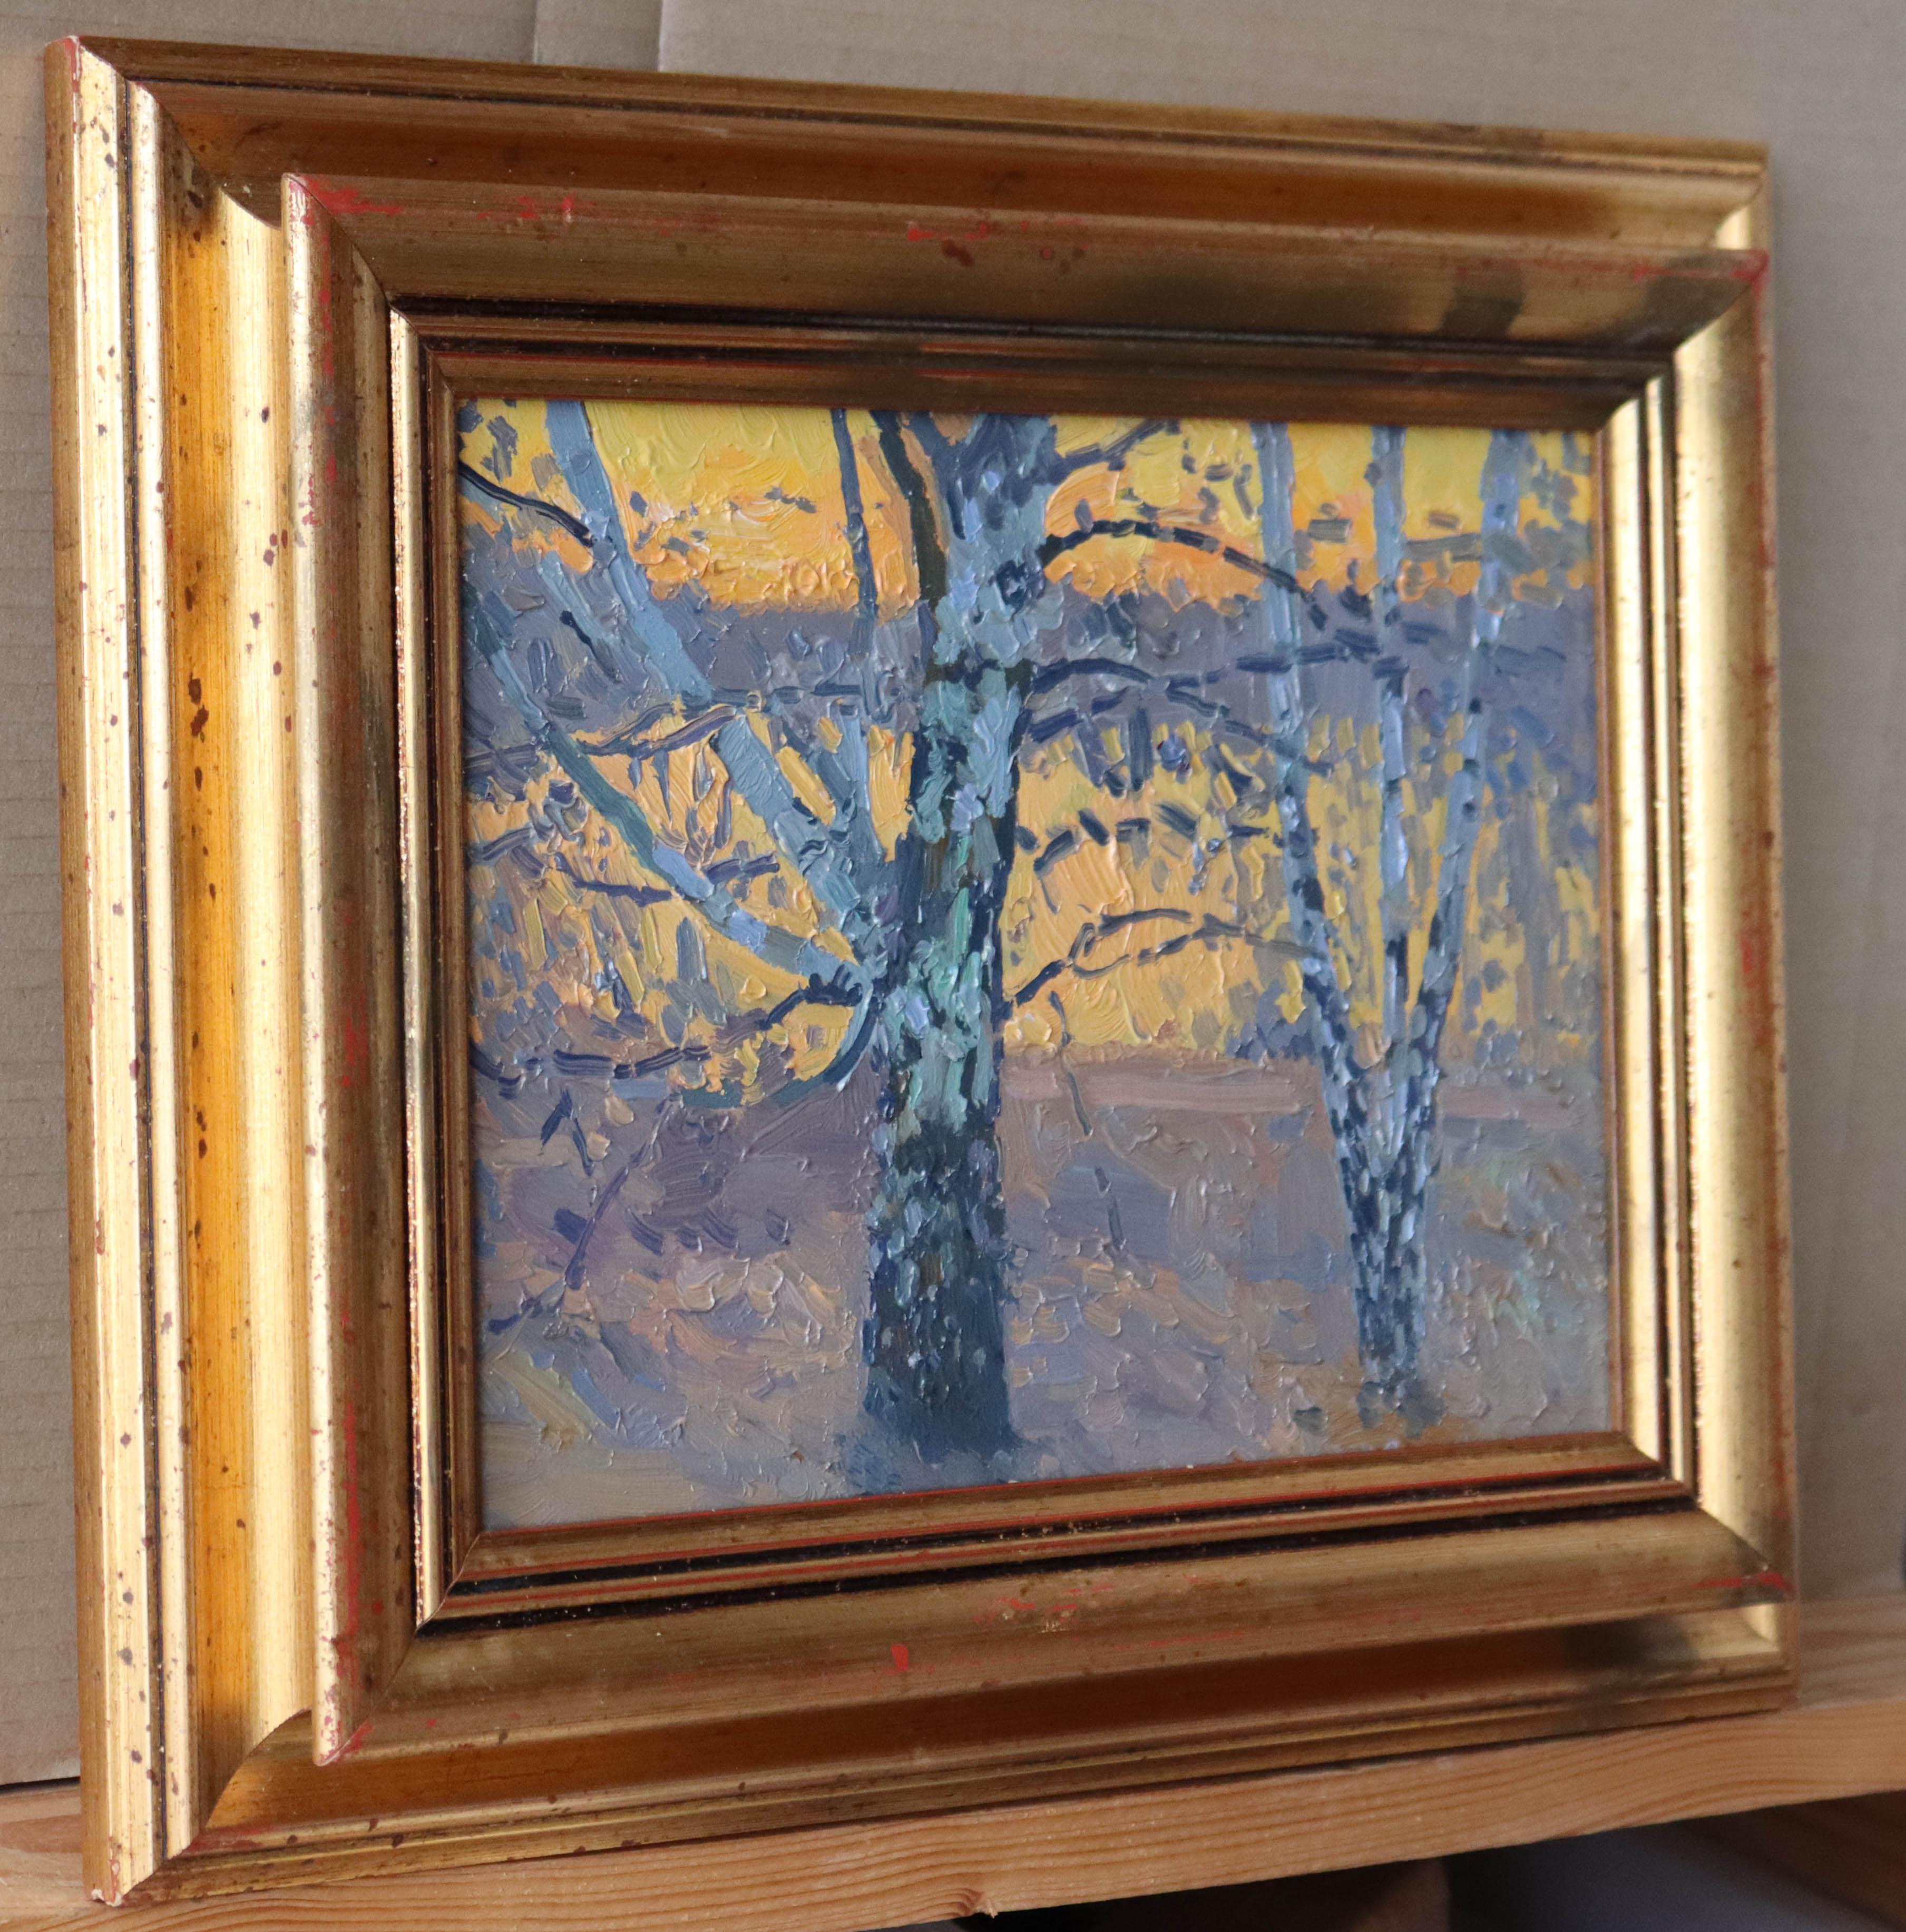 PLEASE NOTE: The painting will be shipped, not framed. The framing option is available on request with additional shipping costs.
These birches grow in a specially protected area of Tsaritsyno Park, and one of the ponds is visible in the background.